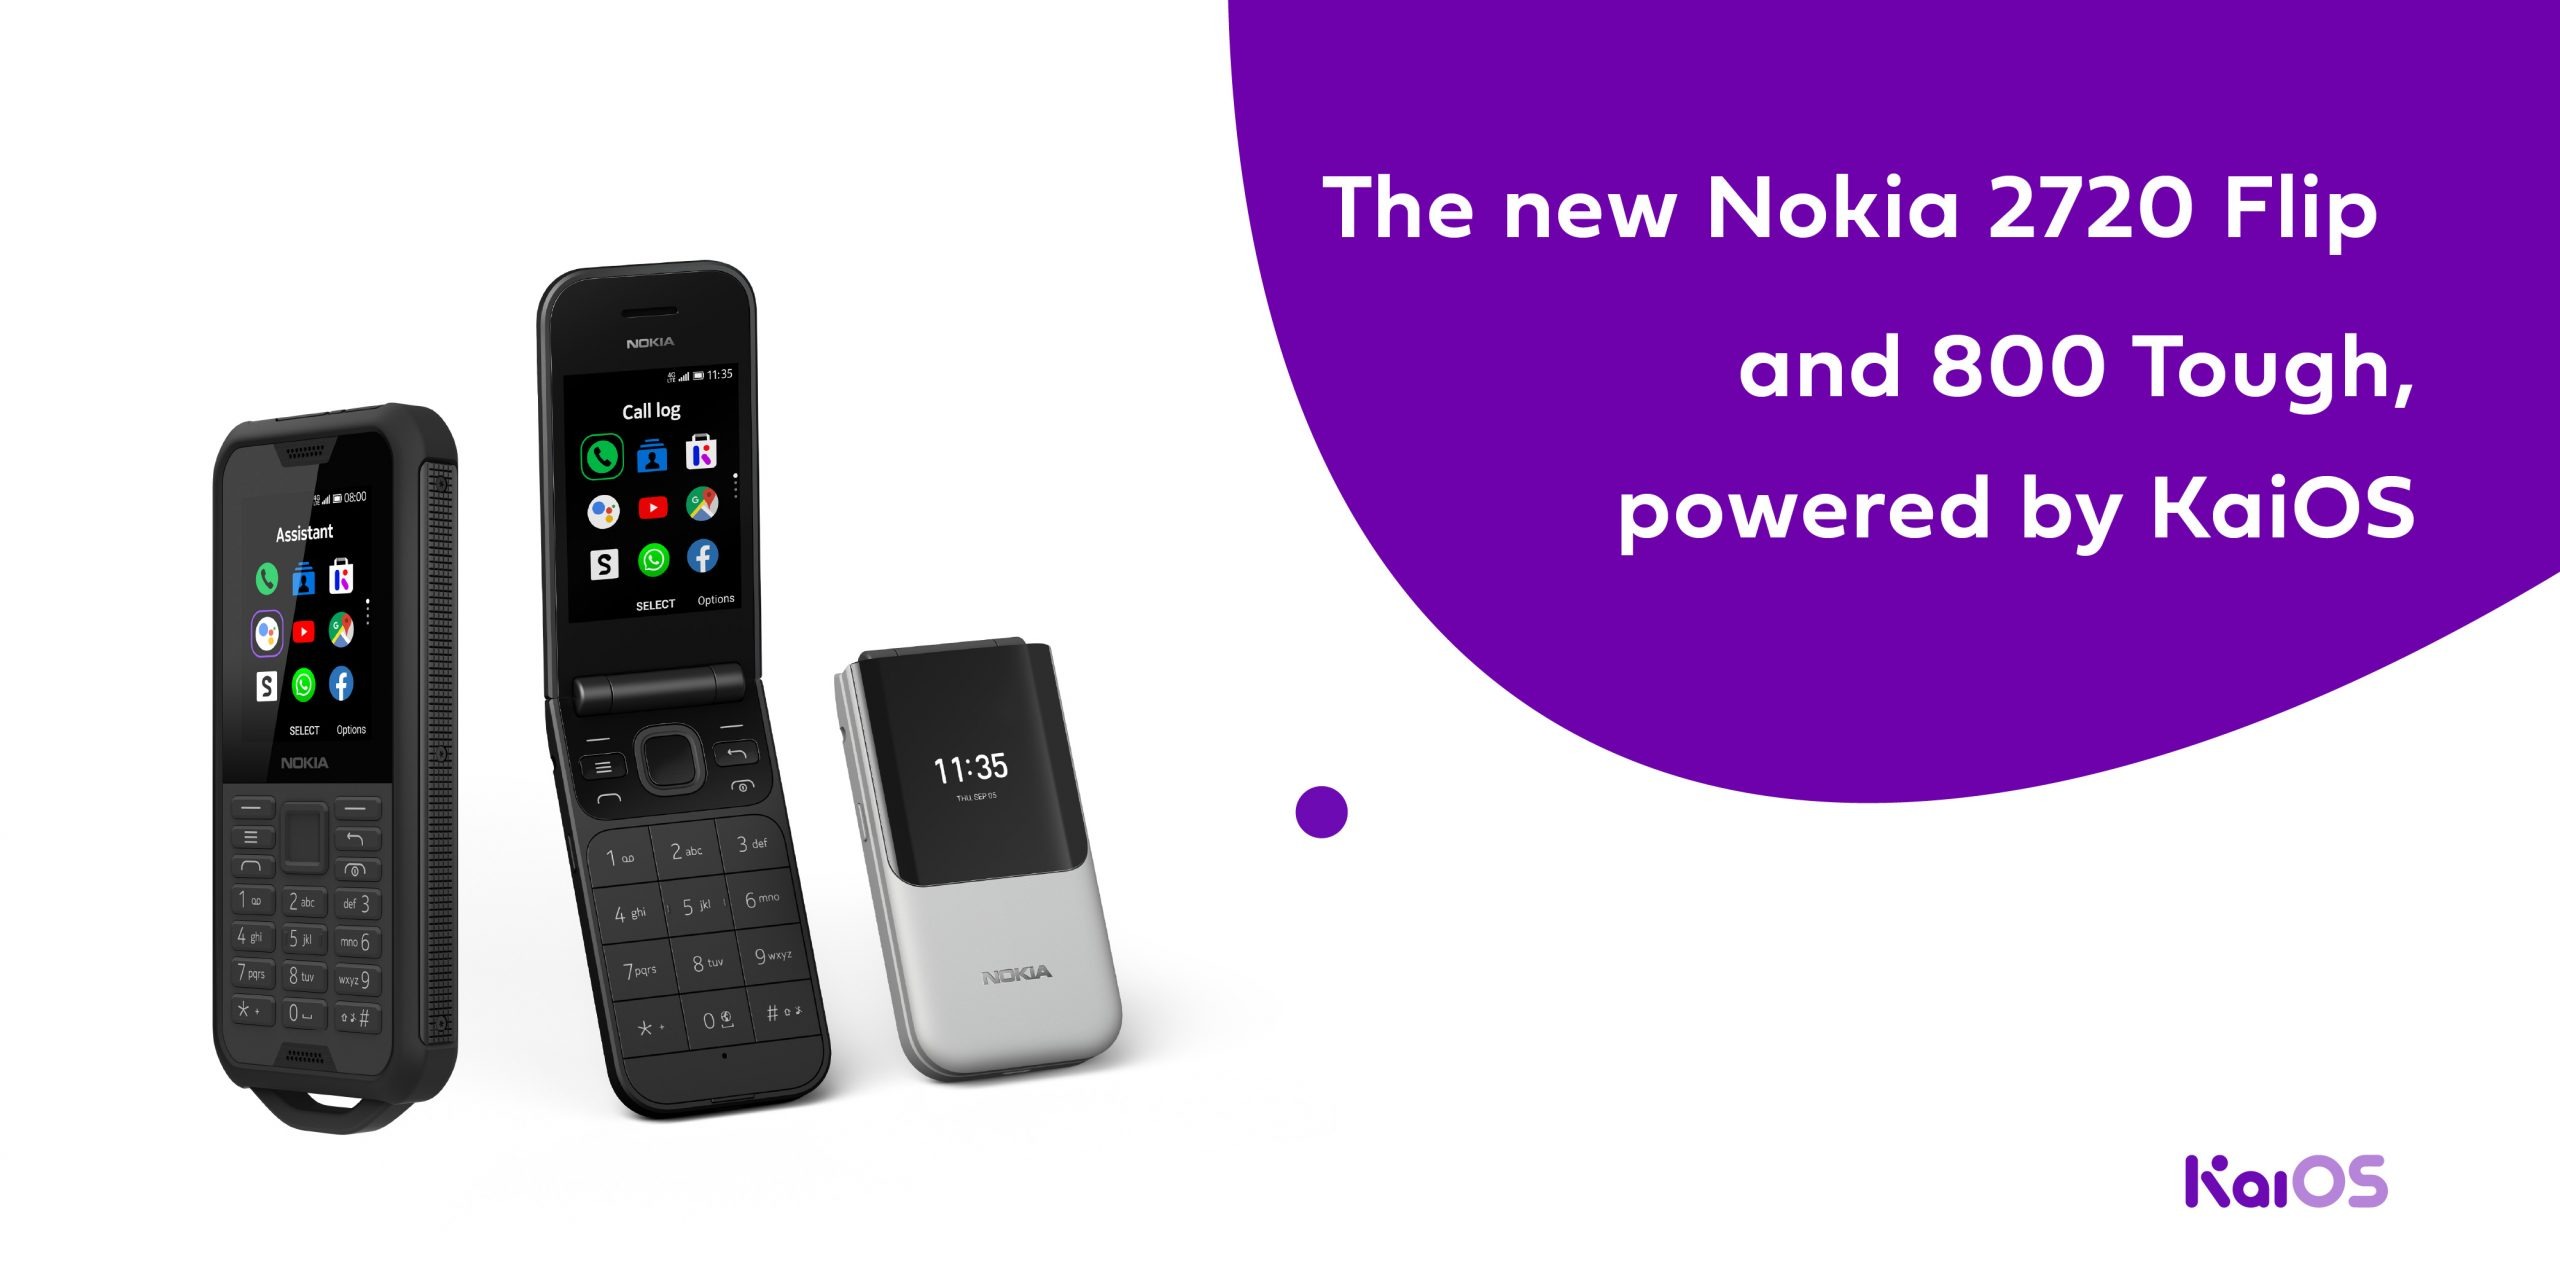 Introducing the Nokia 2720 Flip and 800 Tough, powered by KaiOS